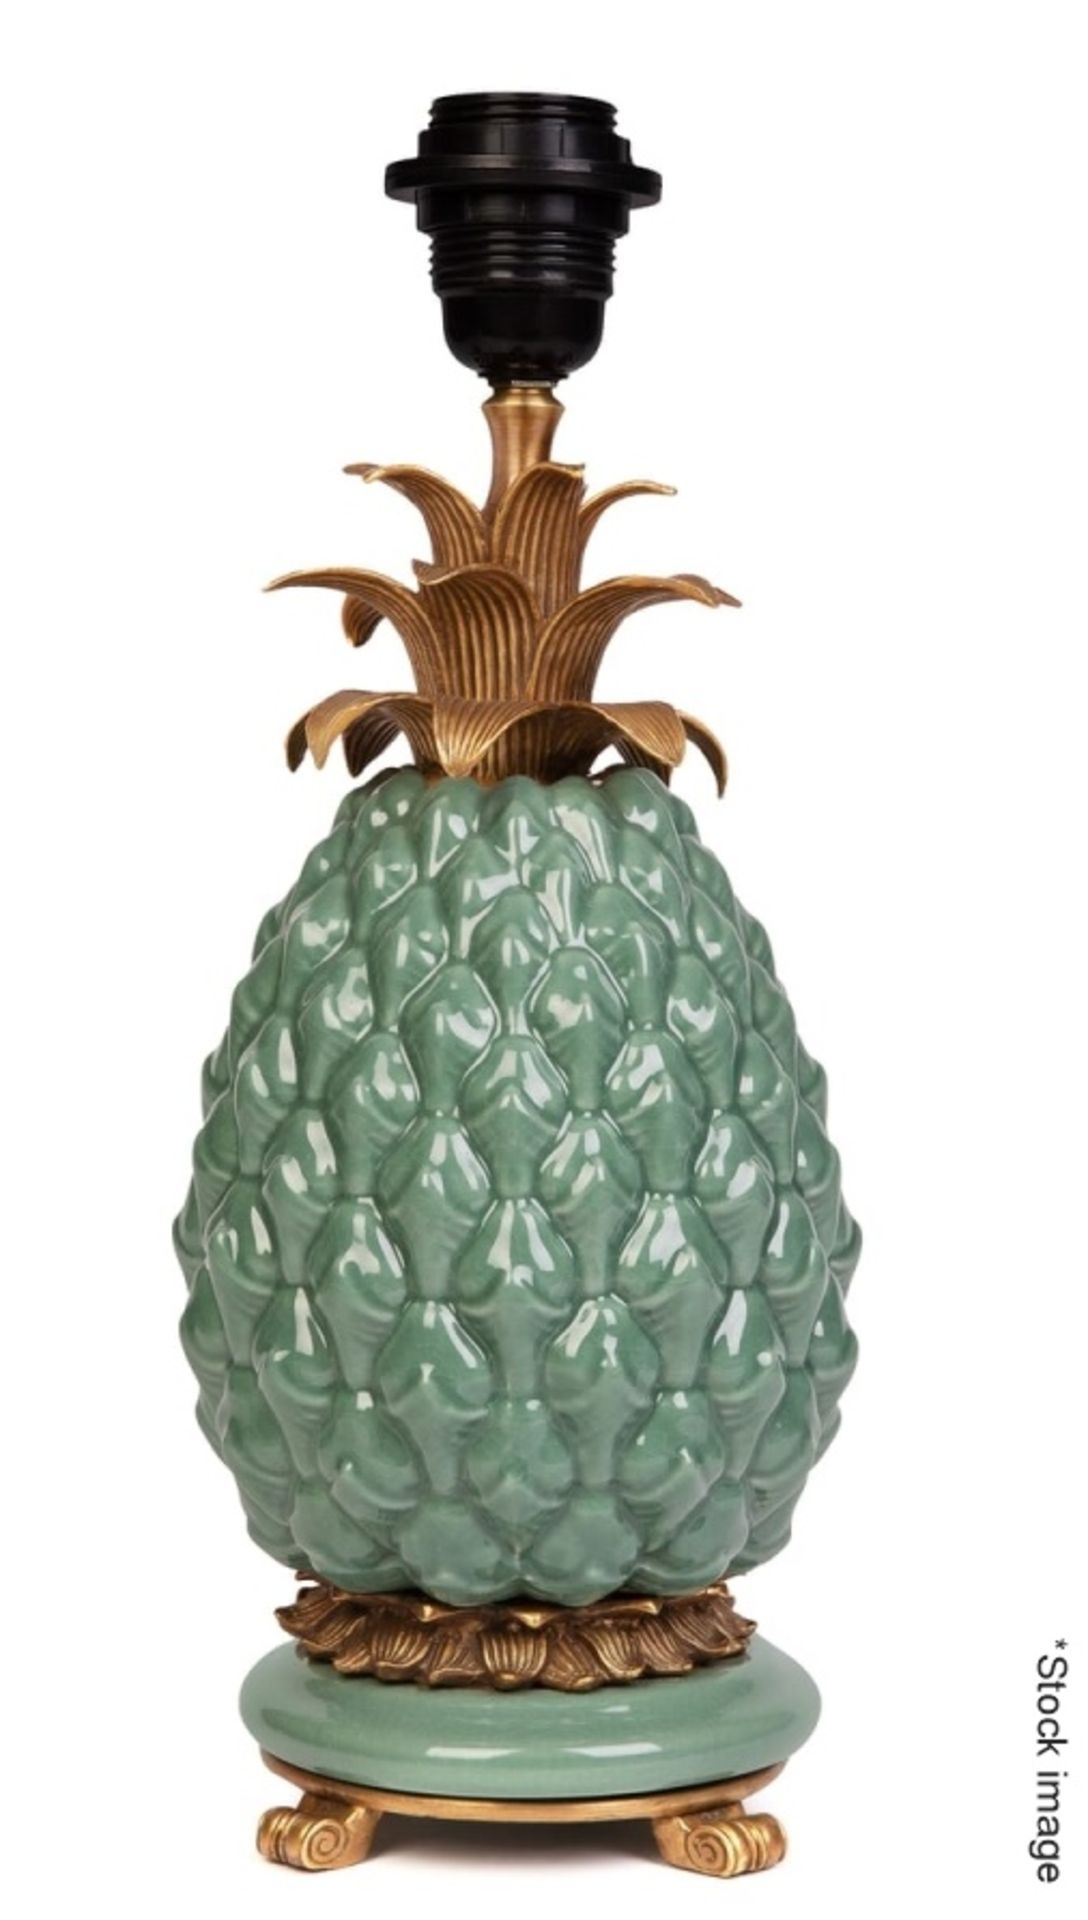 1 x HOUSE OF HACKNEY 'Ananas' Ceramic Pineapple Lamp Stand In Pale Green - Original RRP £545.00 - Image 2 of 8